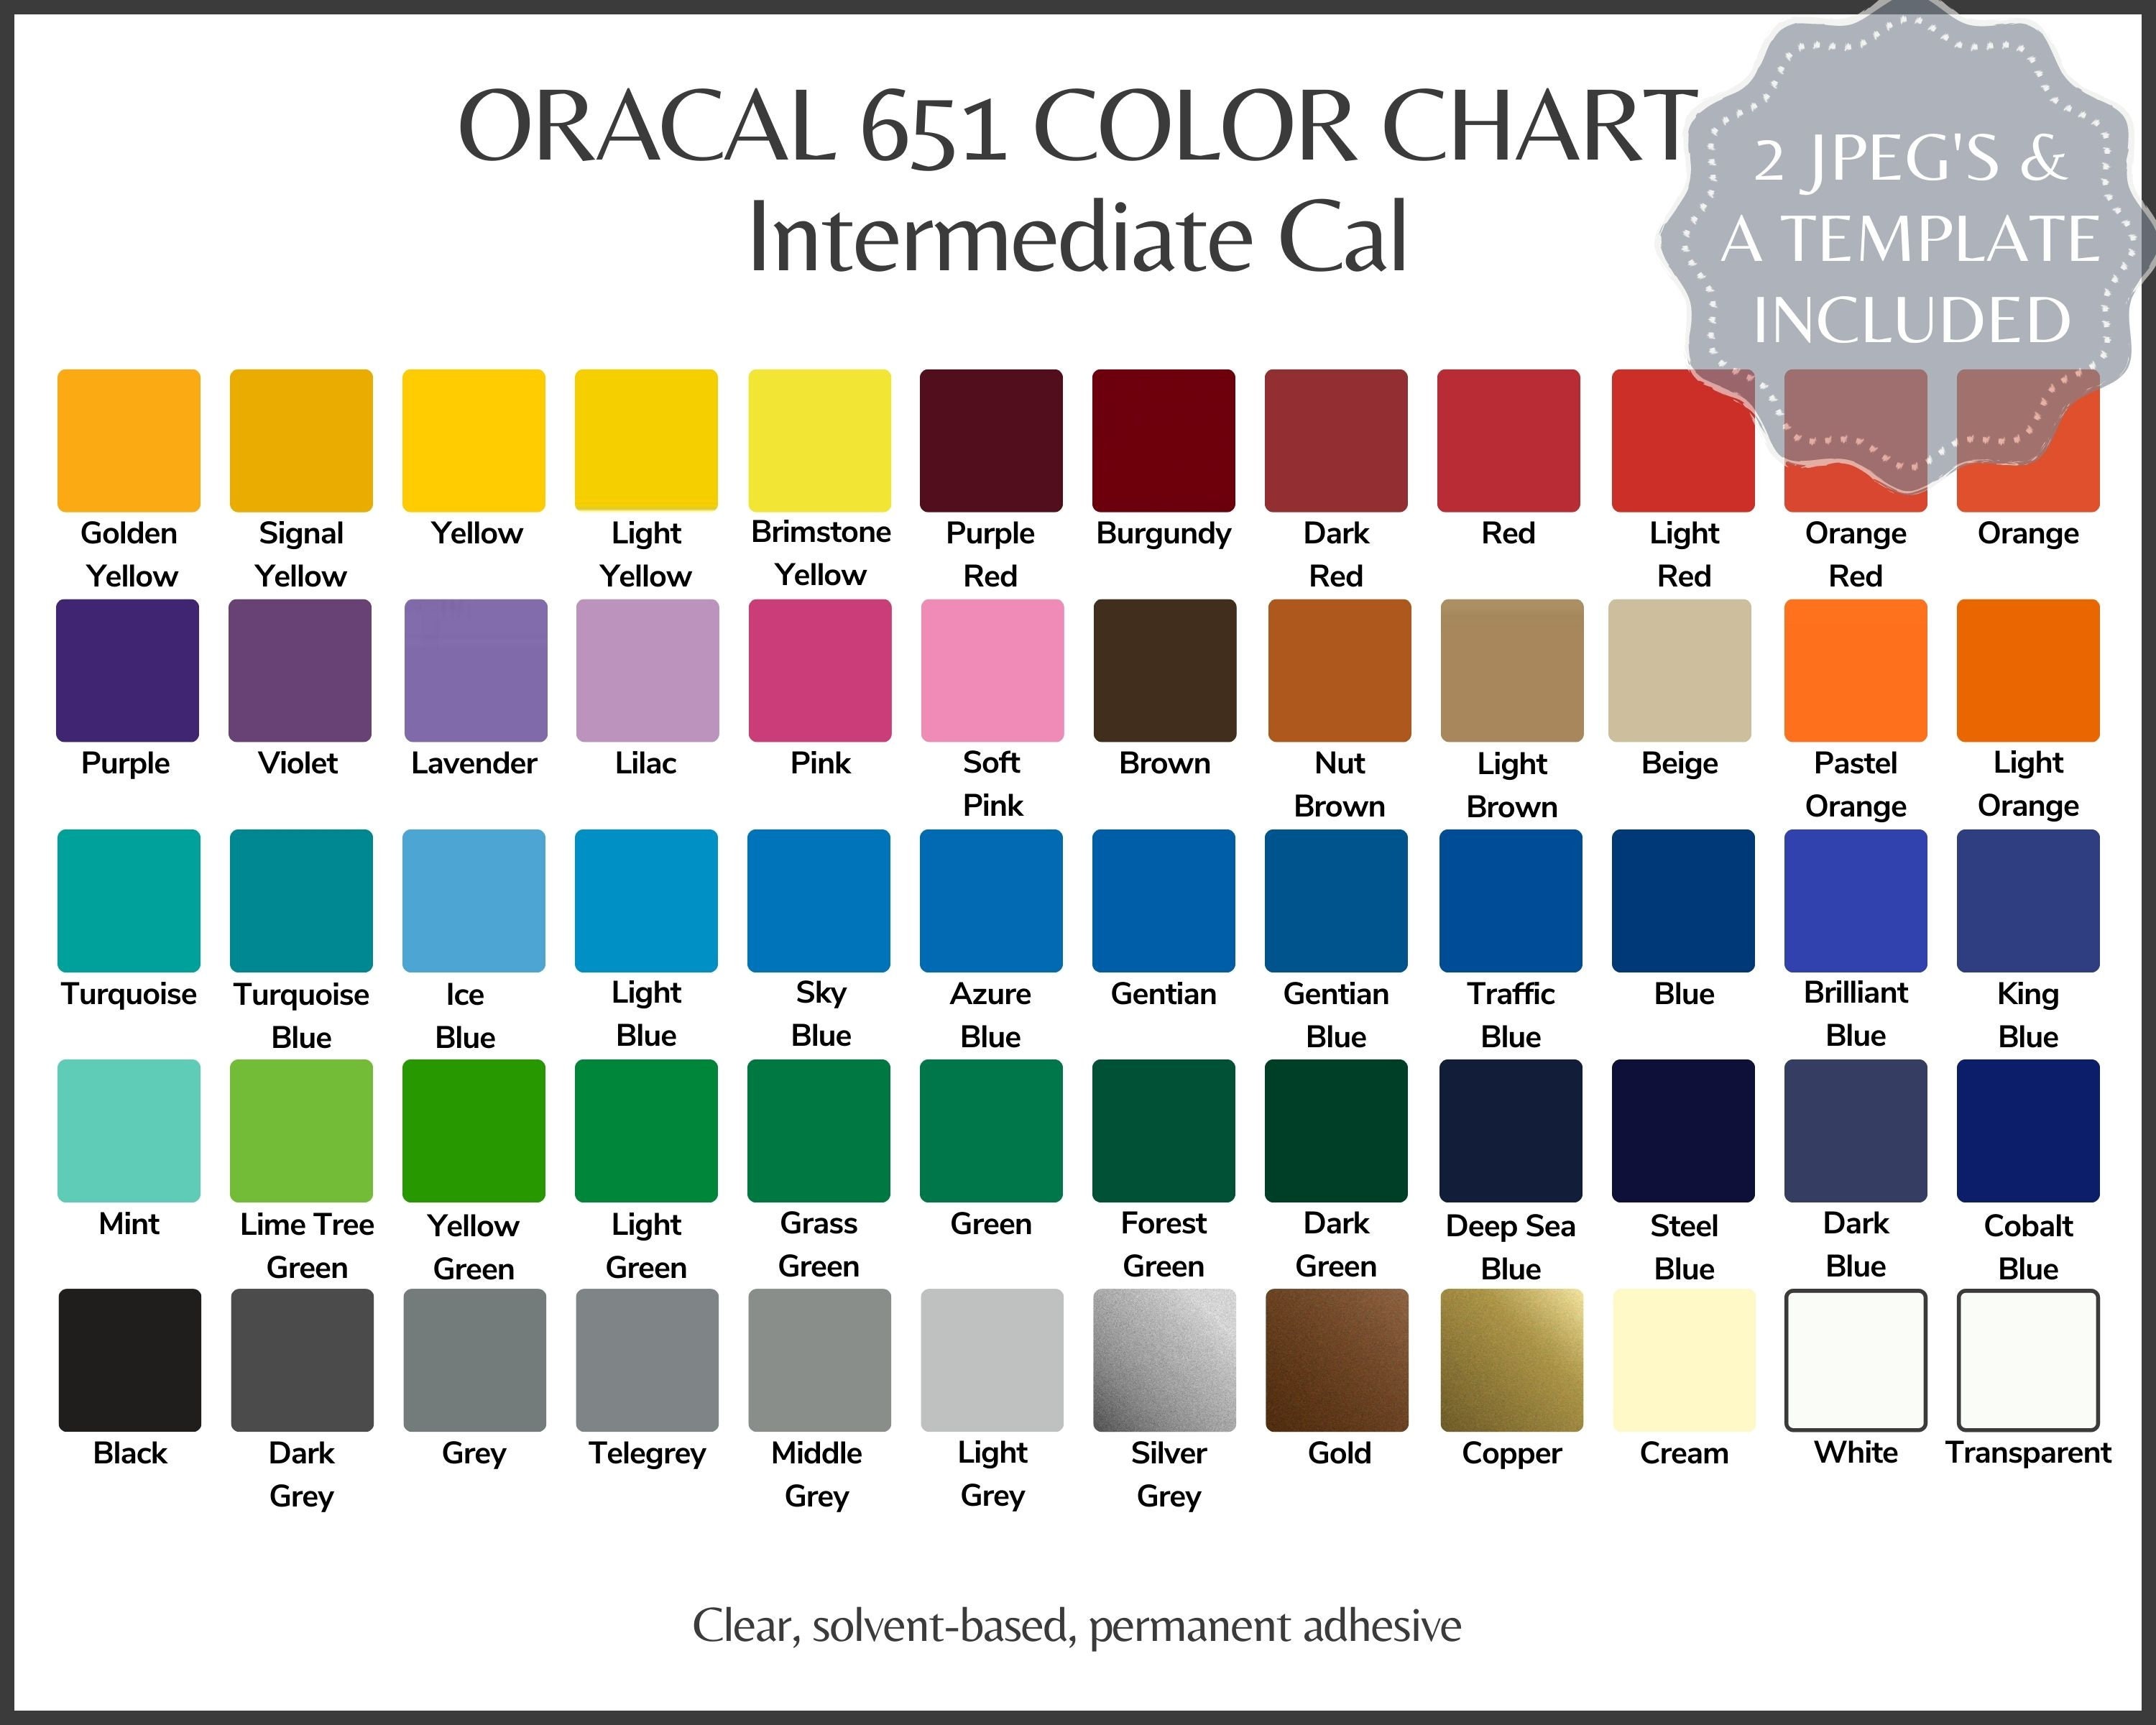 ORACAL 651 Color Chart Oracle 651 Permanent Vinyl Color Guide, 2 Ready to  Use Jpg's Fully Editable Canva Template, All Colors 